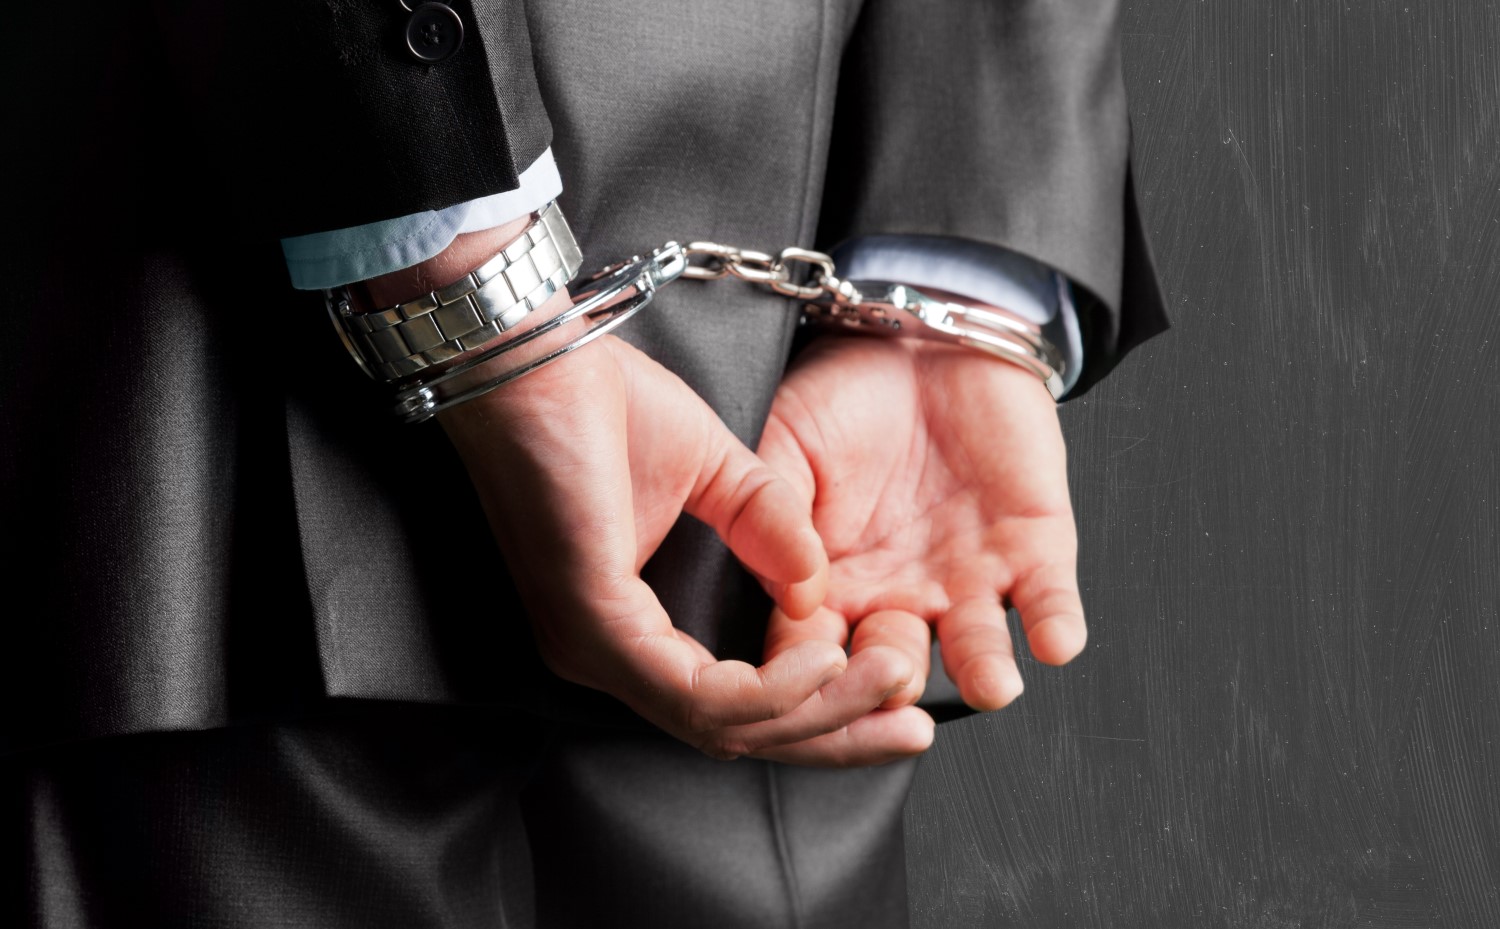 Crypto Exchange CEO Sentenced To 3-Year Jail Term For Faking Trading Volume